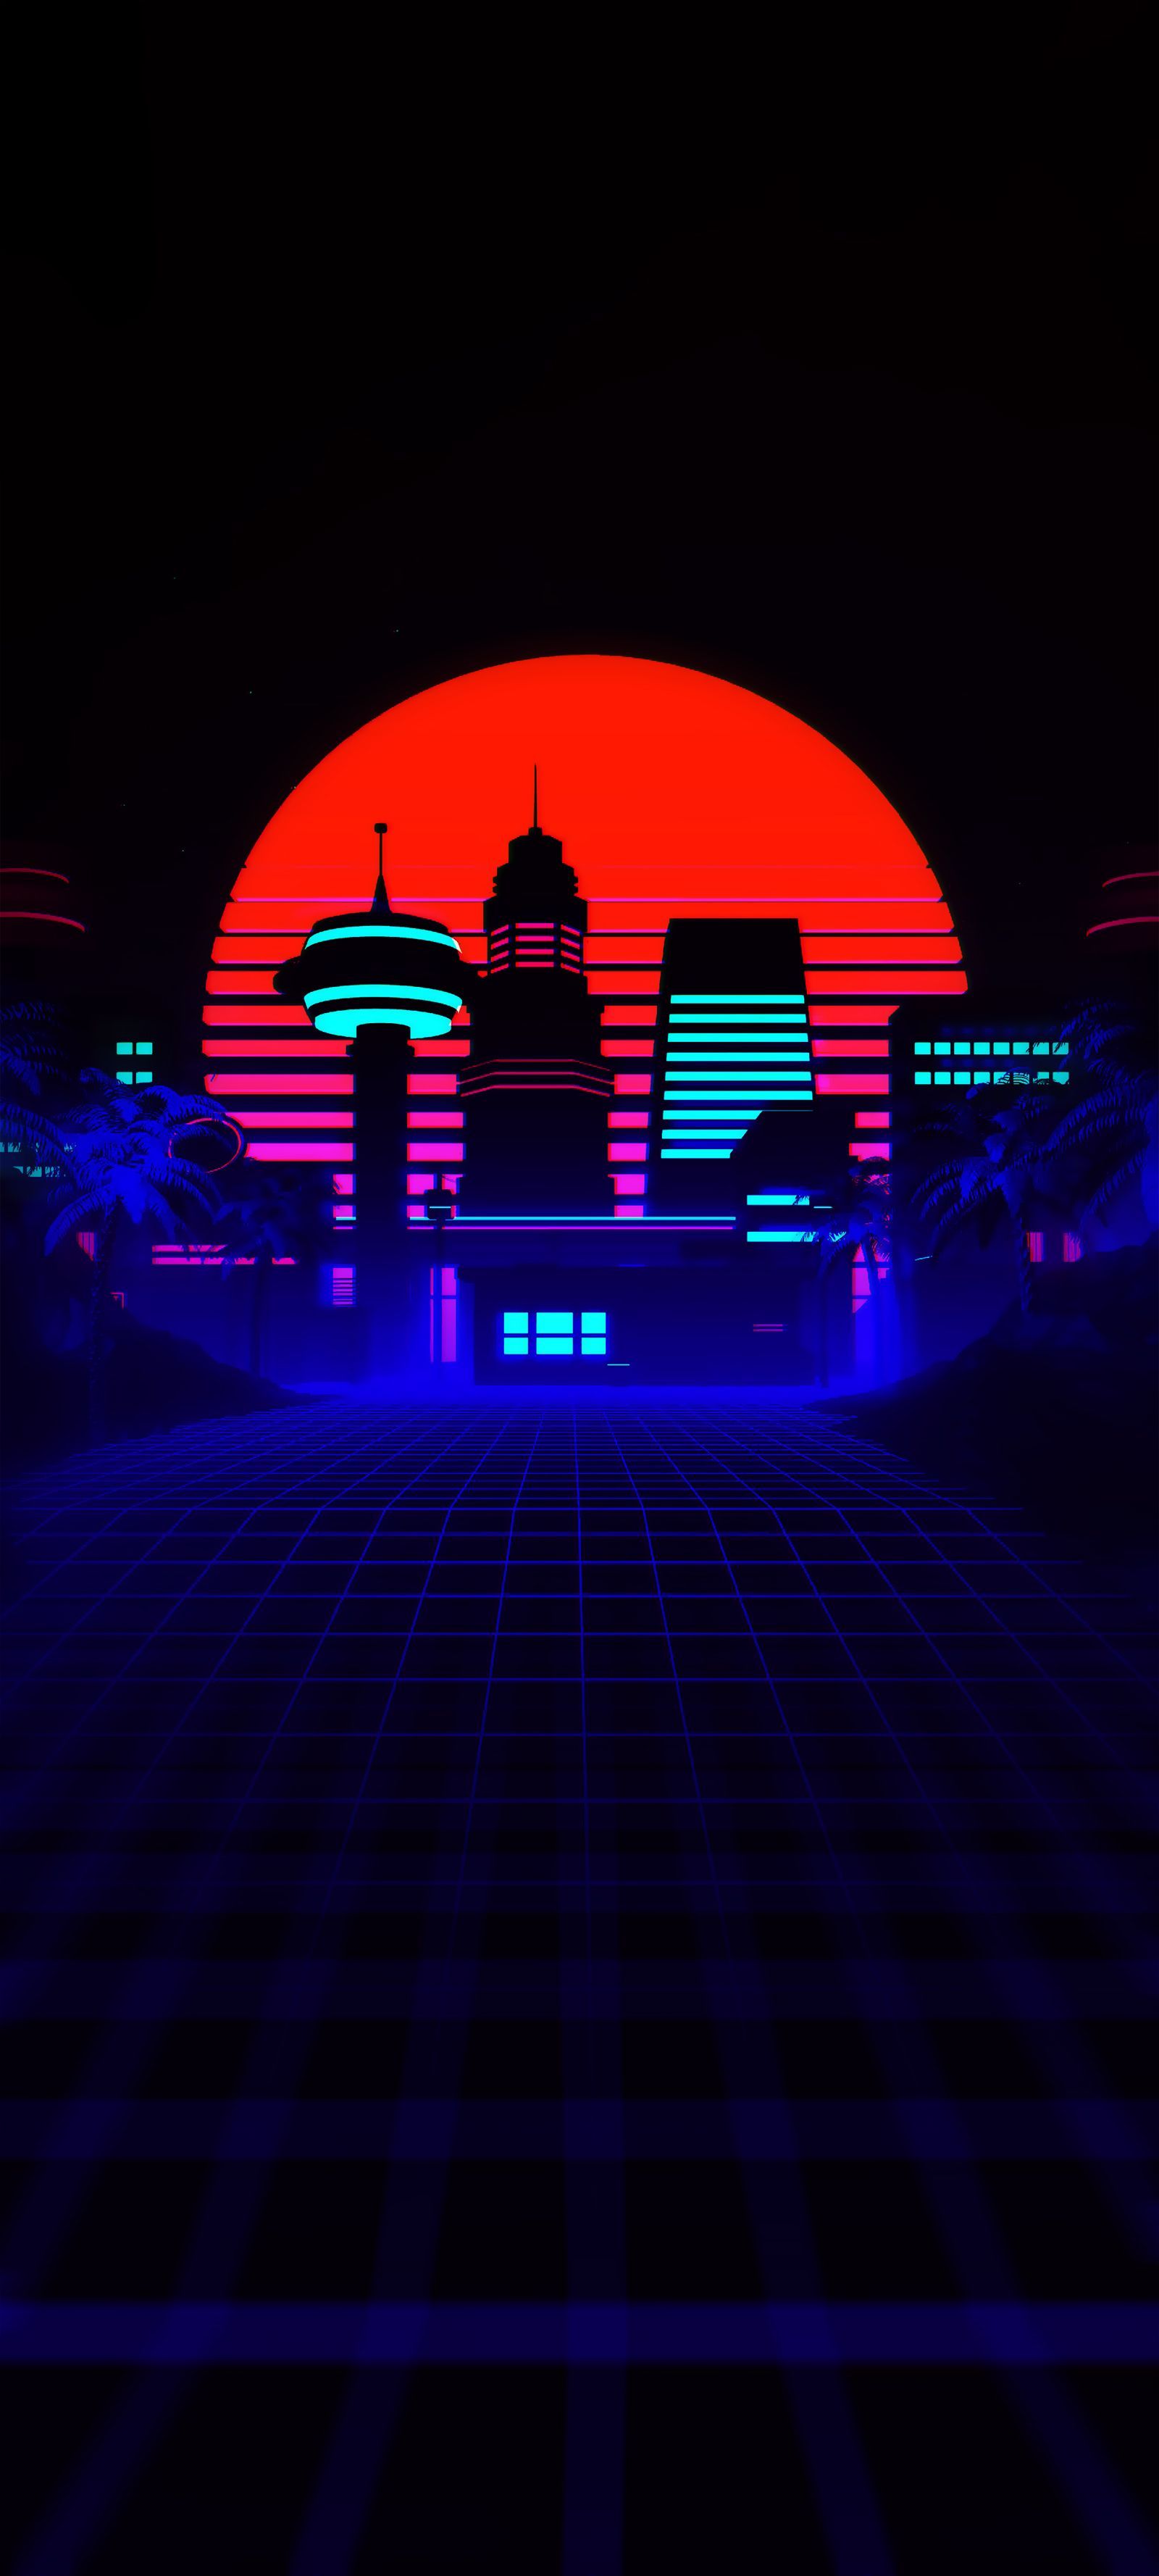 Black Wallpaper for iPhone in 4K: Retro Futuristic Synthwave 80s Vibe